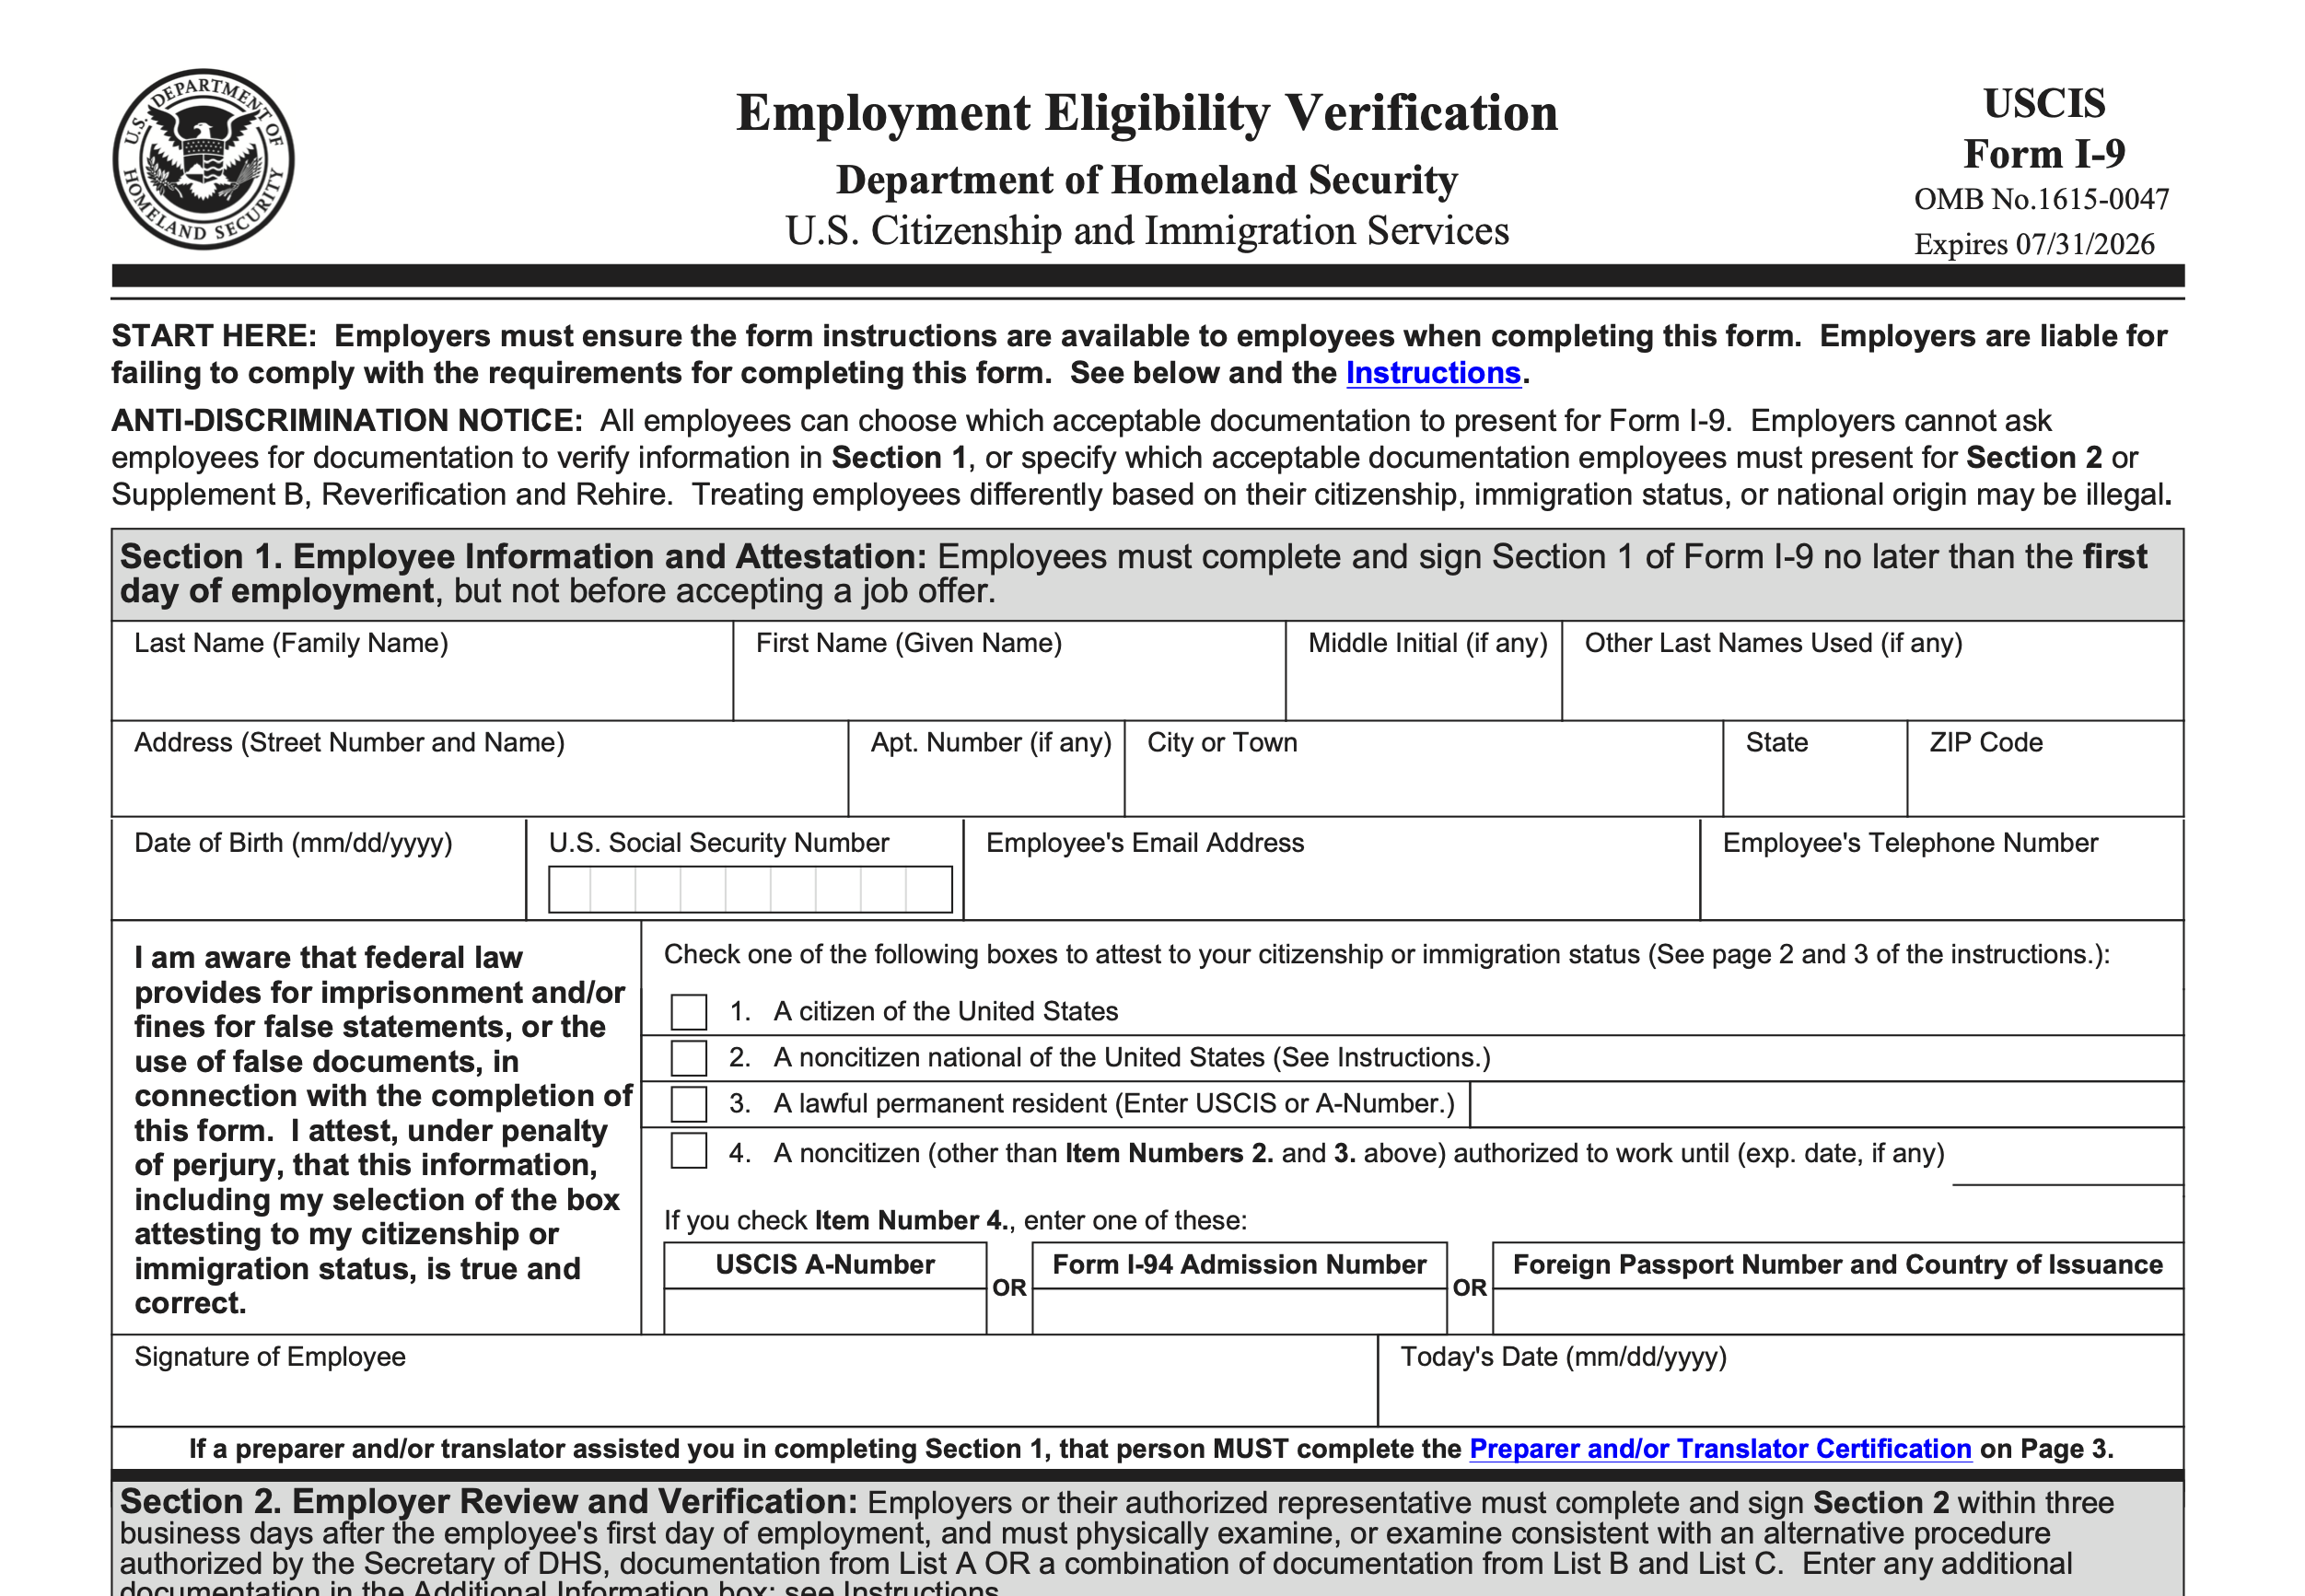 Form 33 Clearance Certificate - File Taxes Online